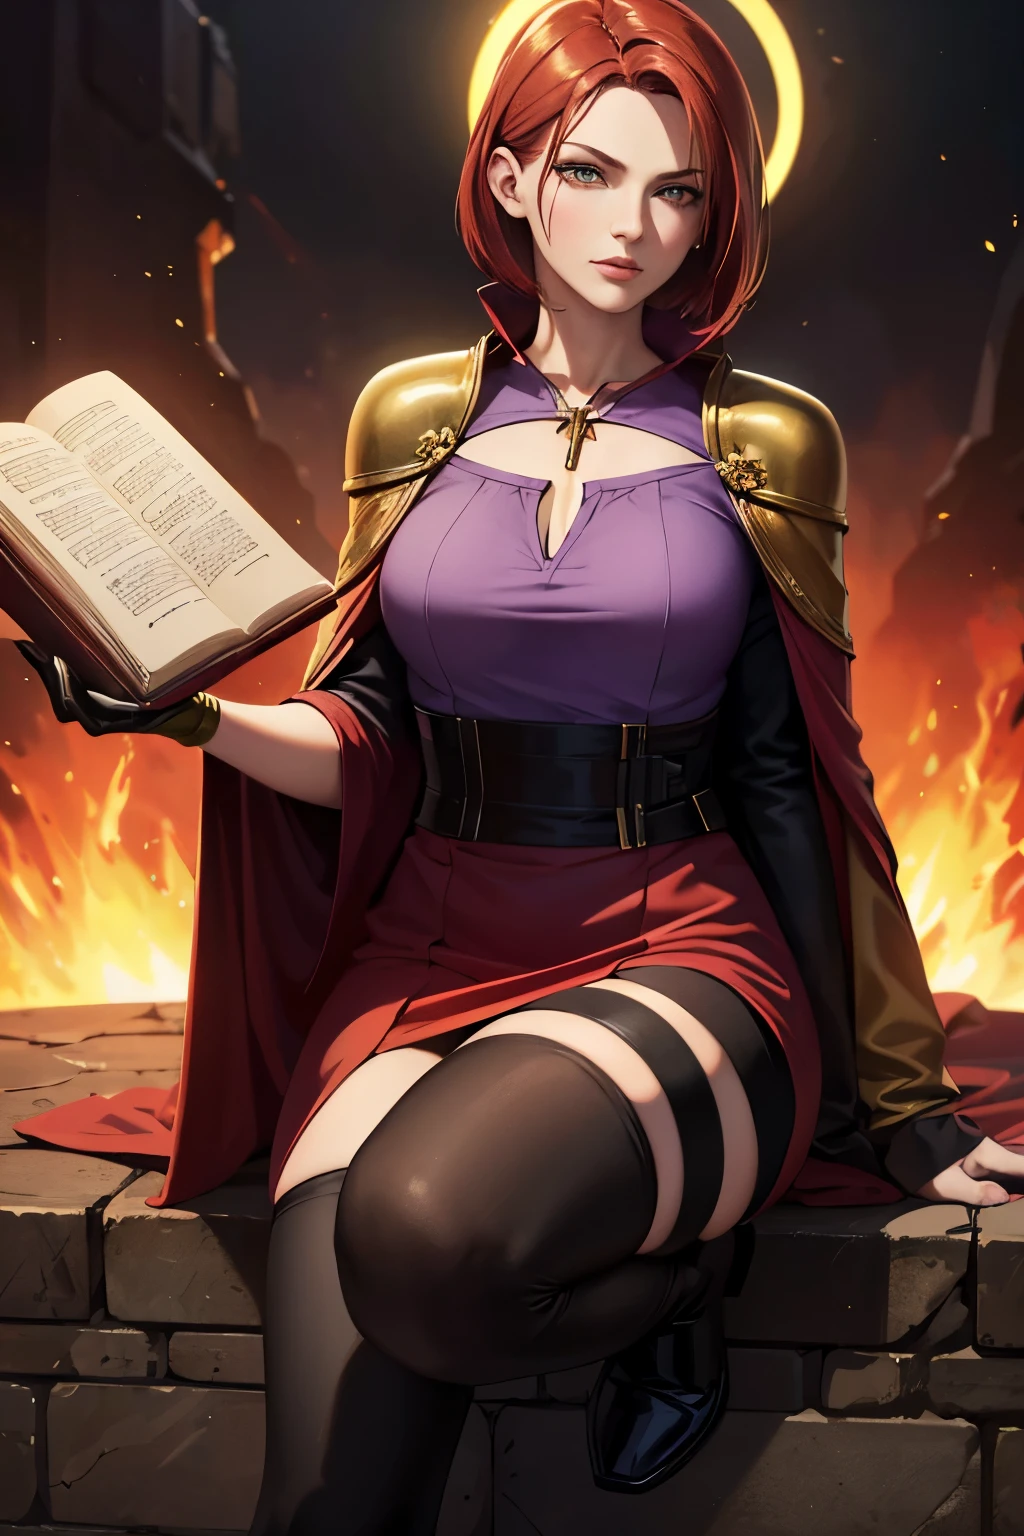 (best quality,highres),(realistic:1.37)Aazimar with fiery red hair, a bob haircut swept to the right eye, golden eyes, a flowing purple cloak with green blouse, a golden halo above head, holding a spellbook in the left hand, full length figure, black boots, in a dark fantasy atmosphere